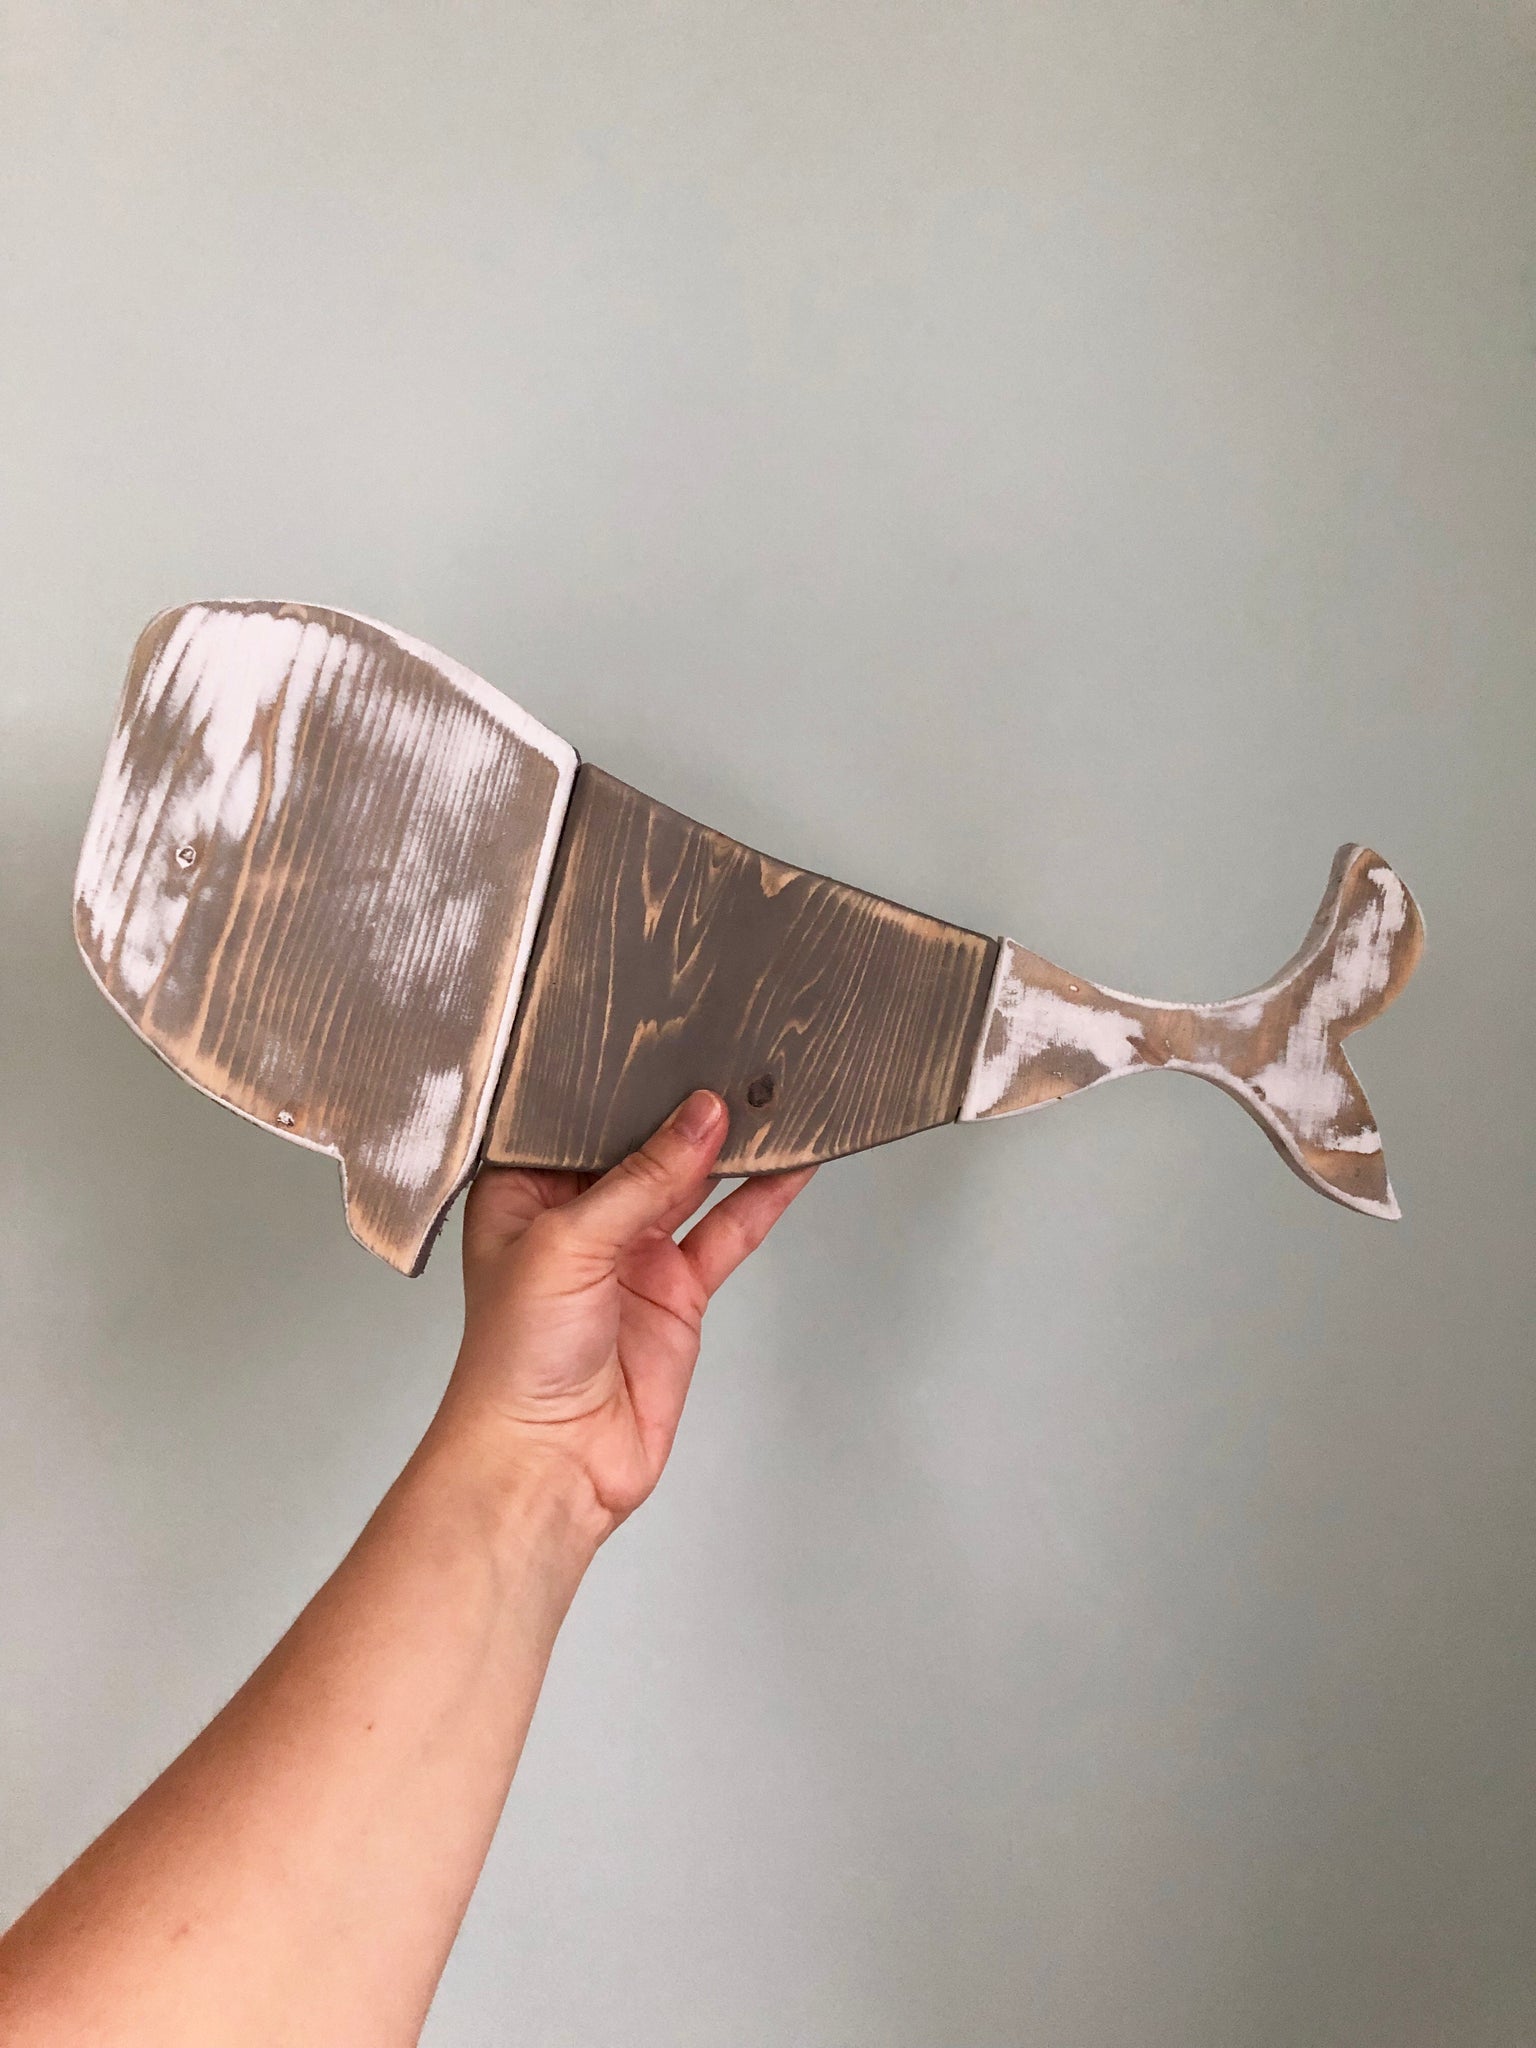 Wooden Whale Wall Art - Grey & White - Weathered Beach Decor